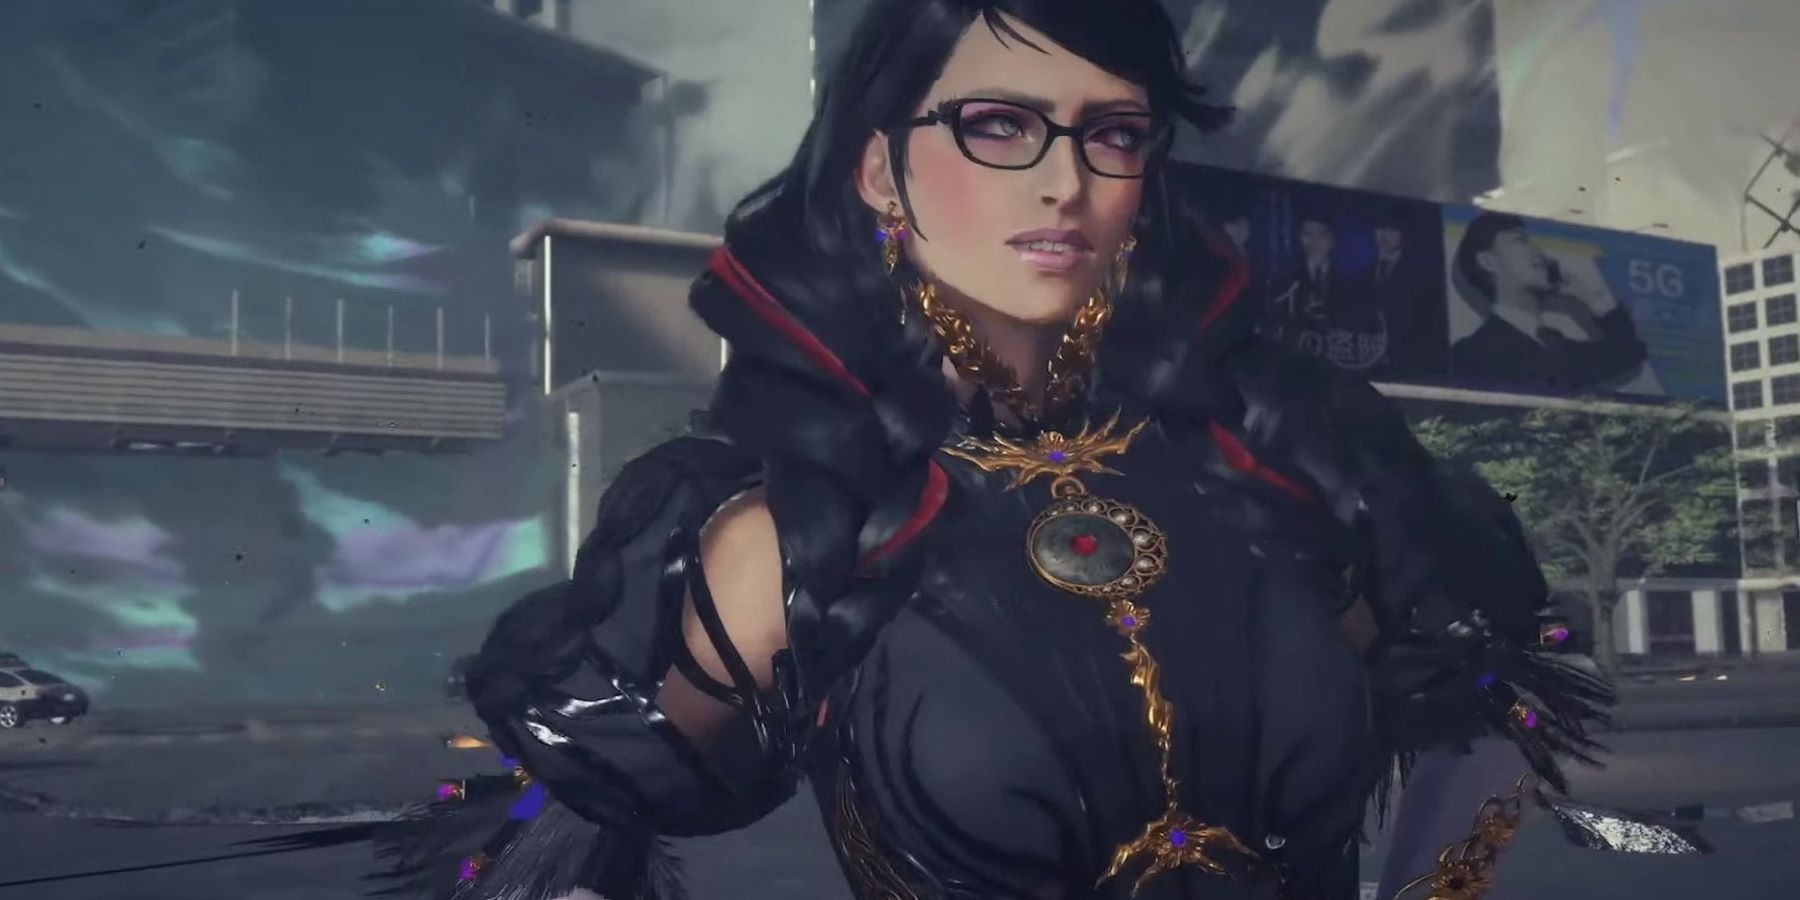 Bayonetta delivering the "unfashionably late" line in the latest Bayonetta 3 trailer